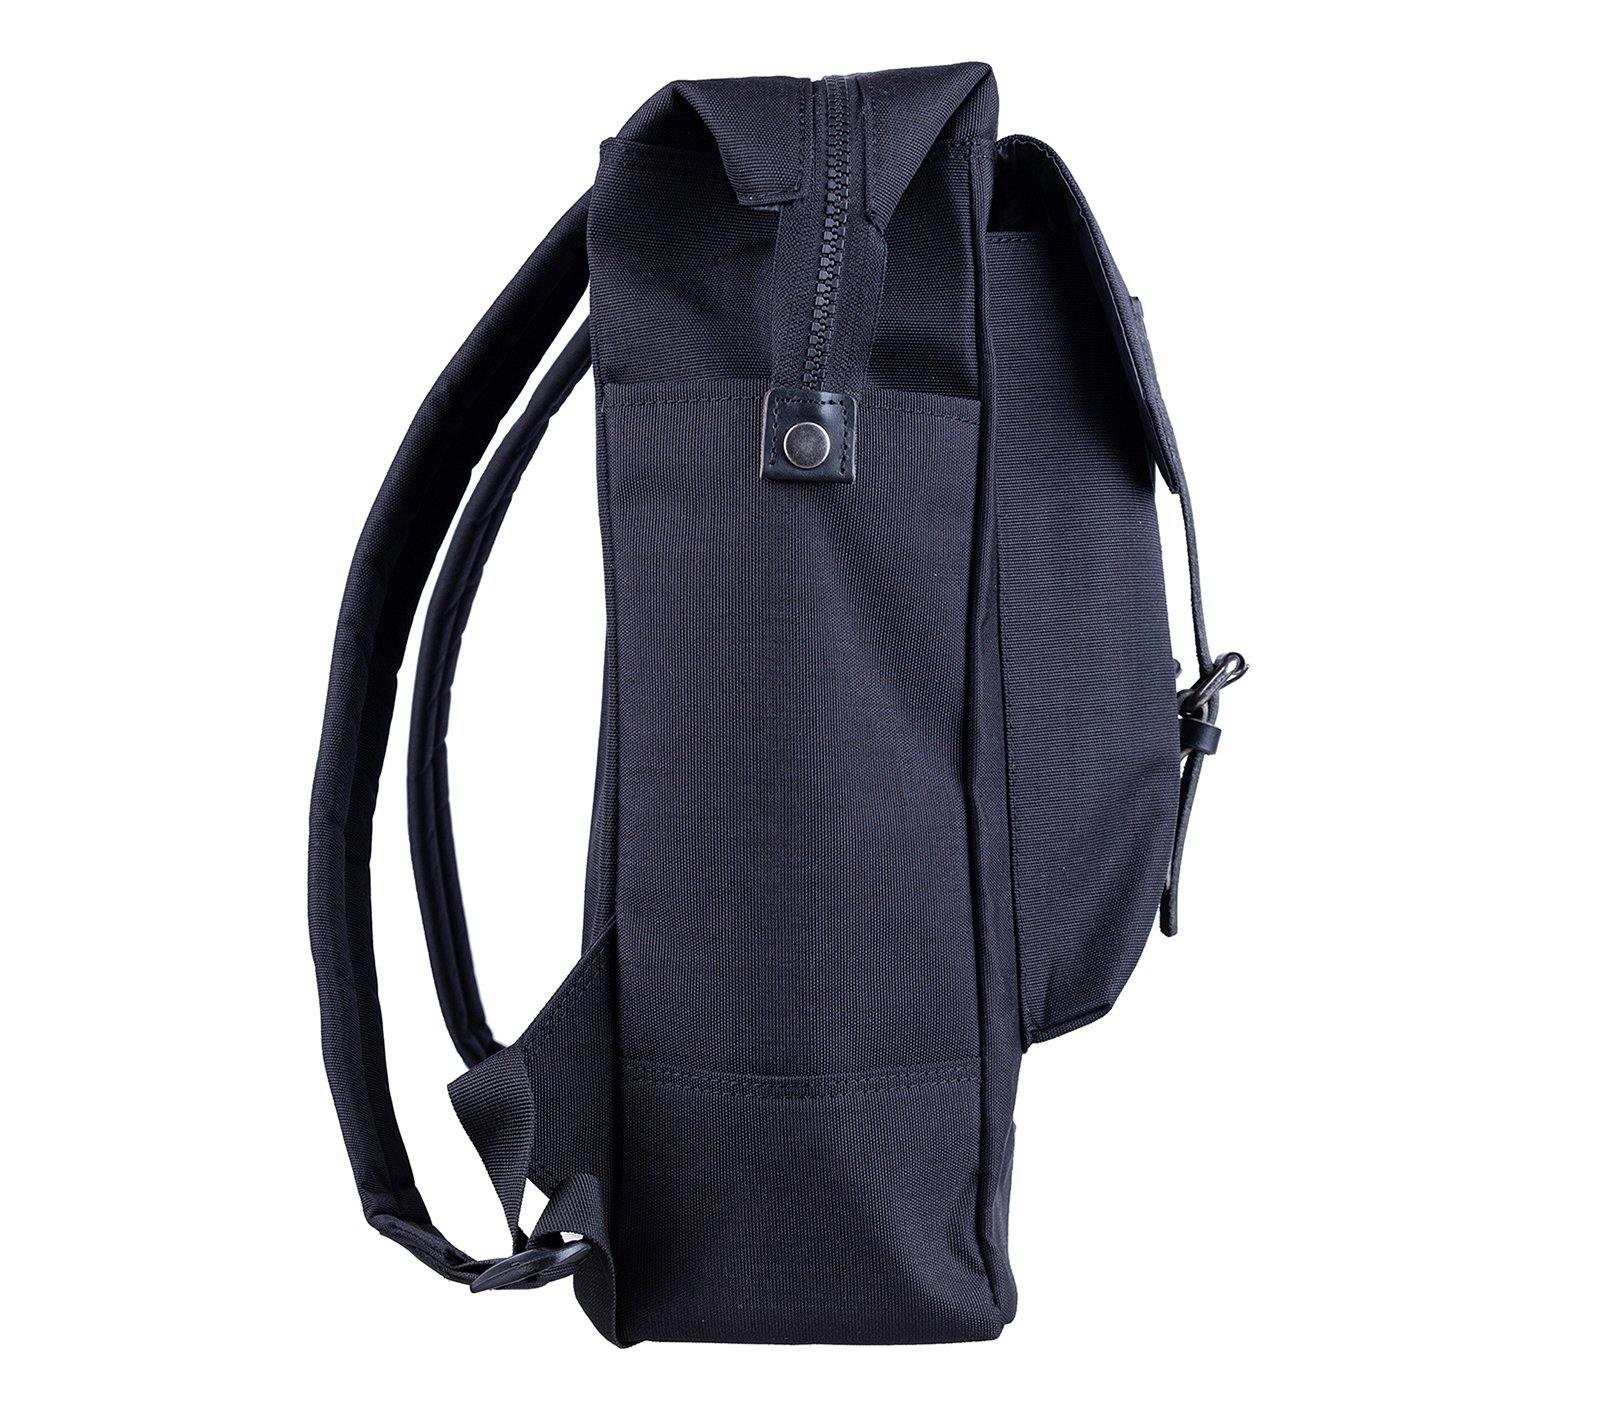 I am ADAM - A Backpack by Strap It.